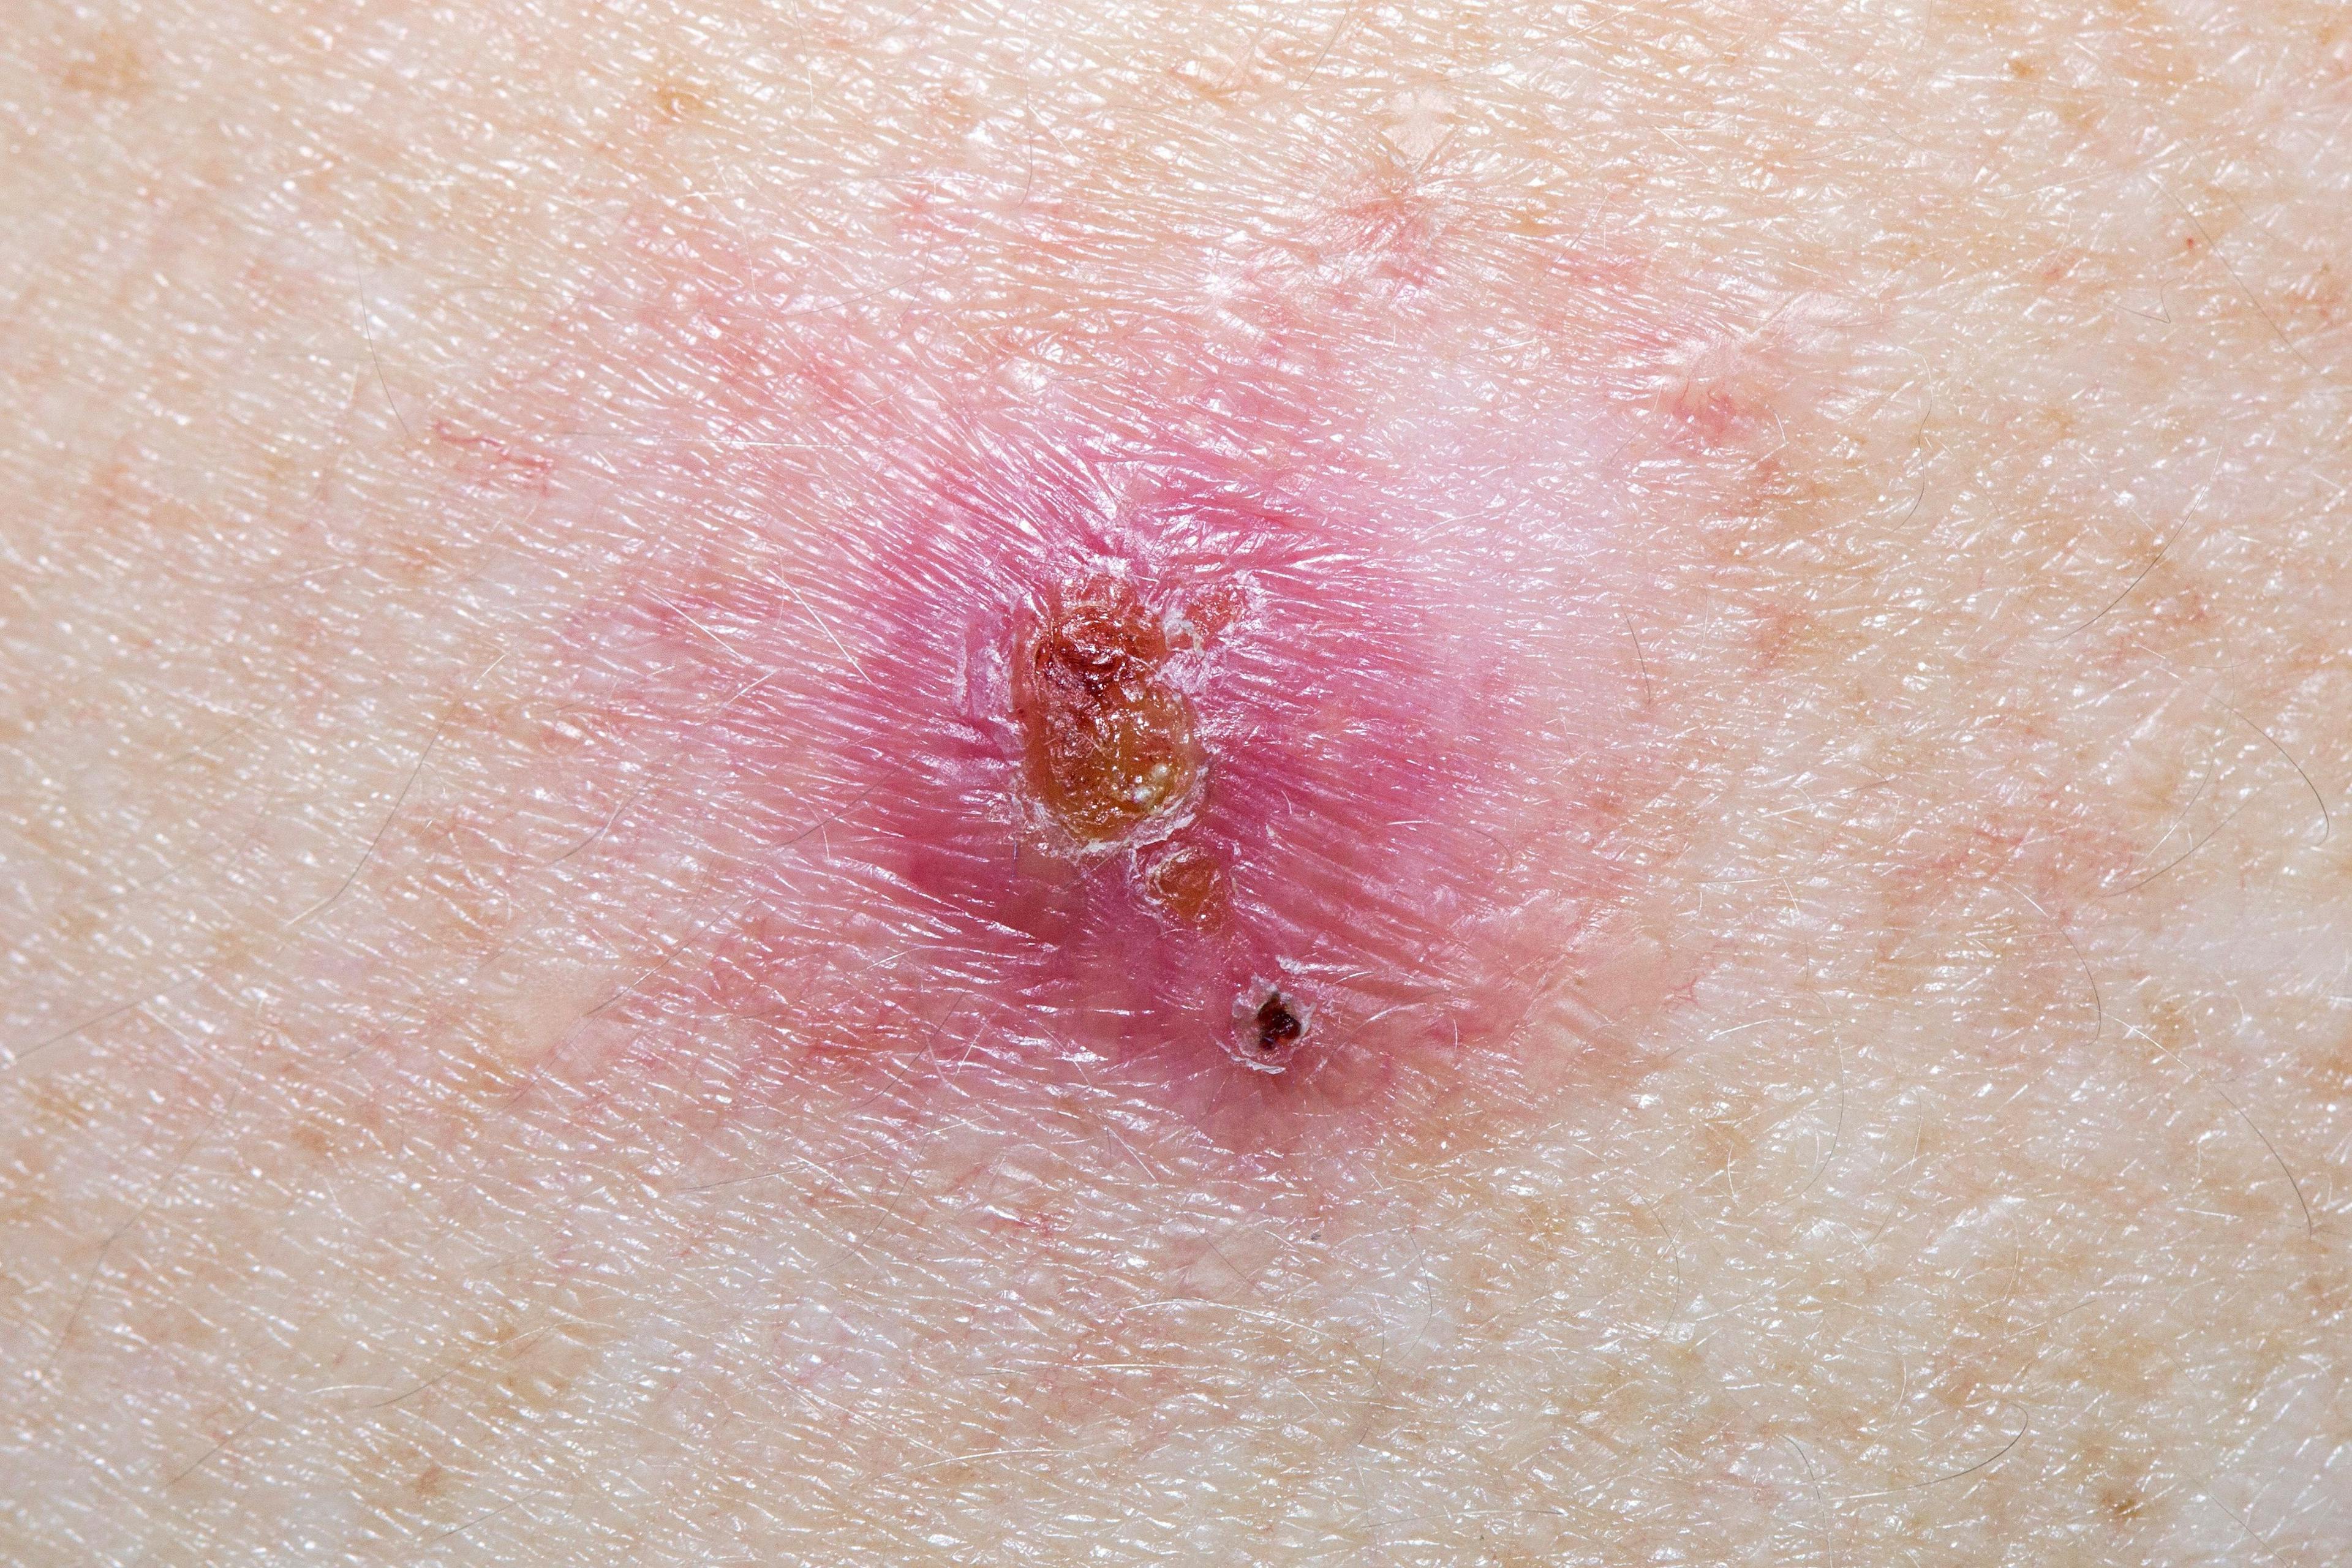 Hedgehog Inhibitor Therapy’s Use in Advanced Basal Cell Carcinoma – Does It Work?